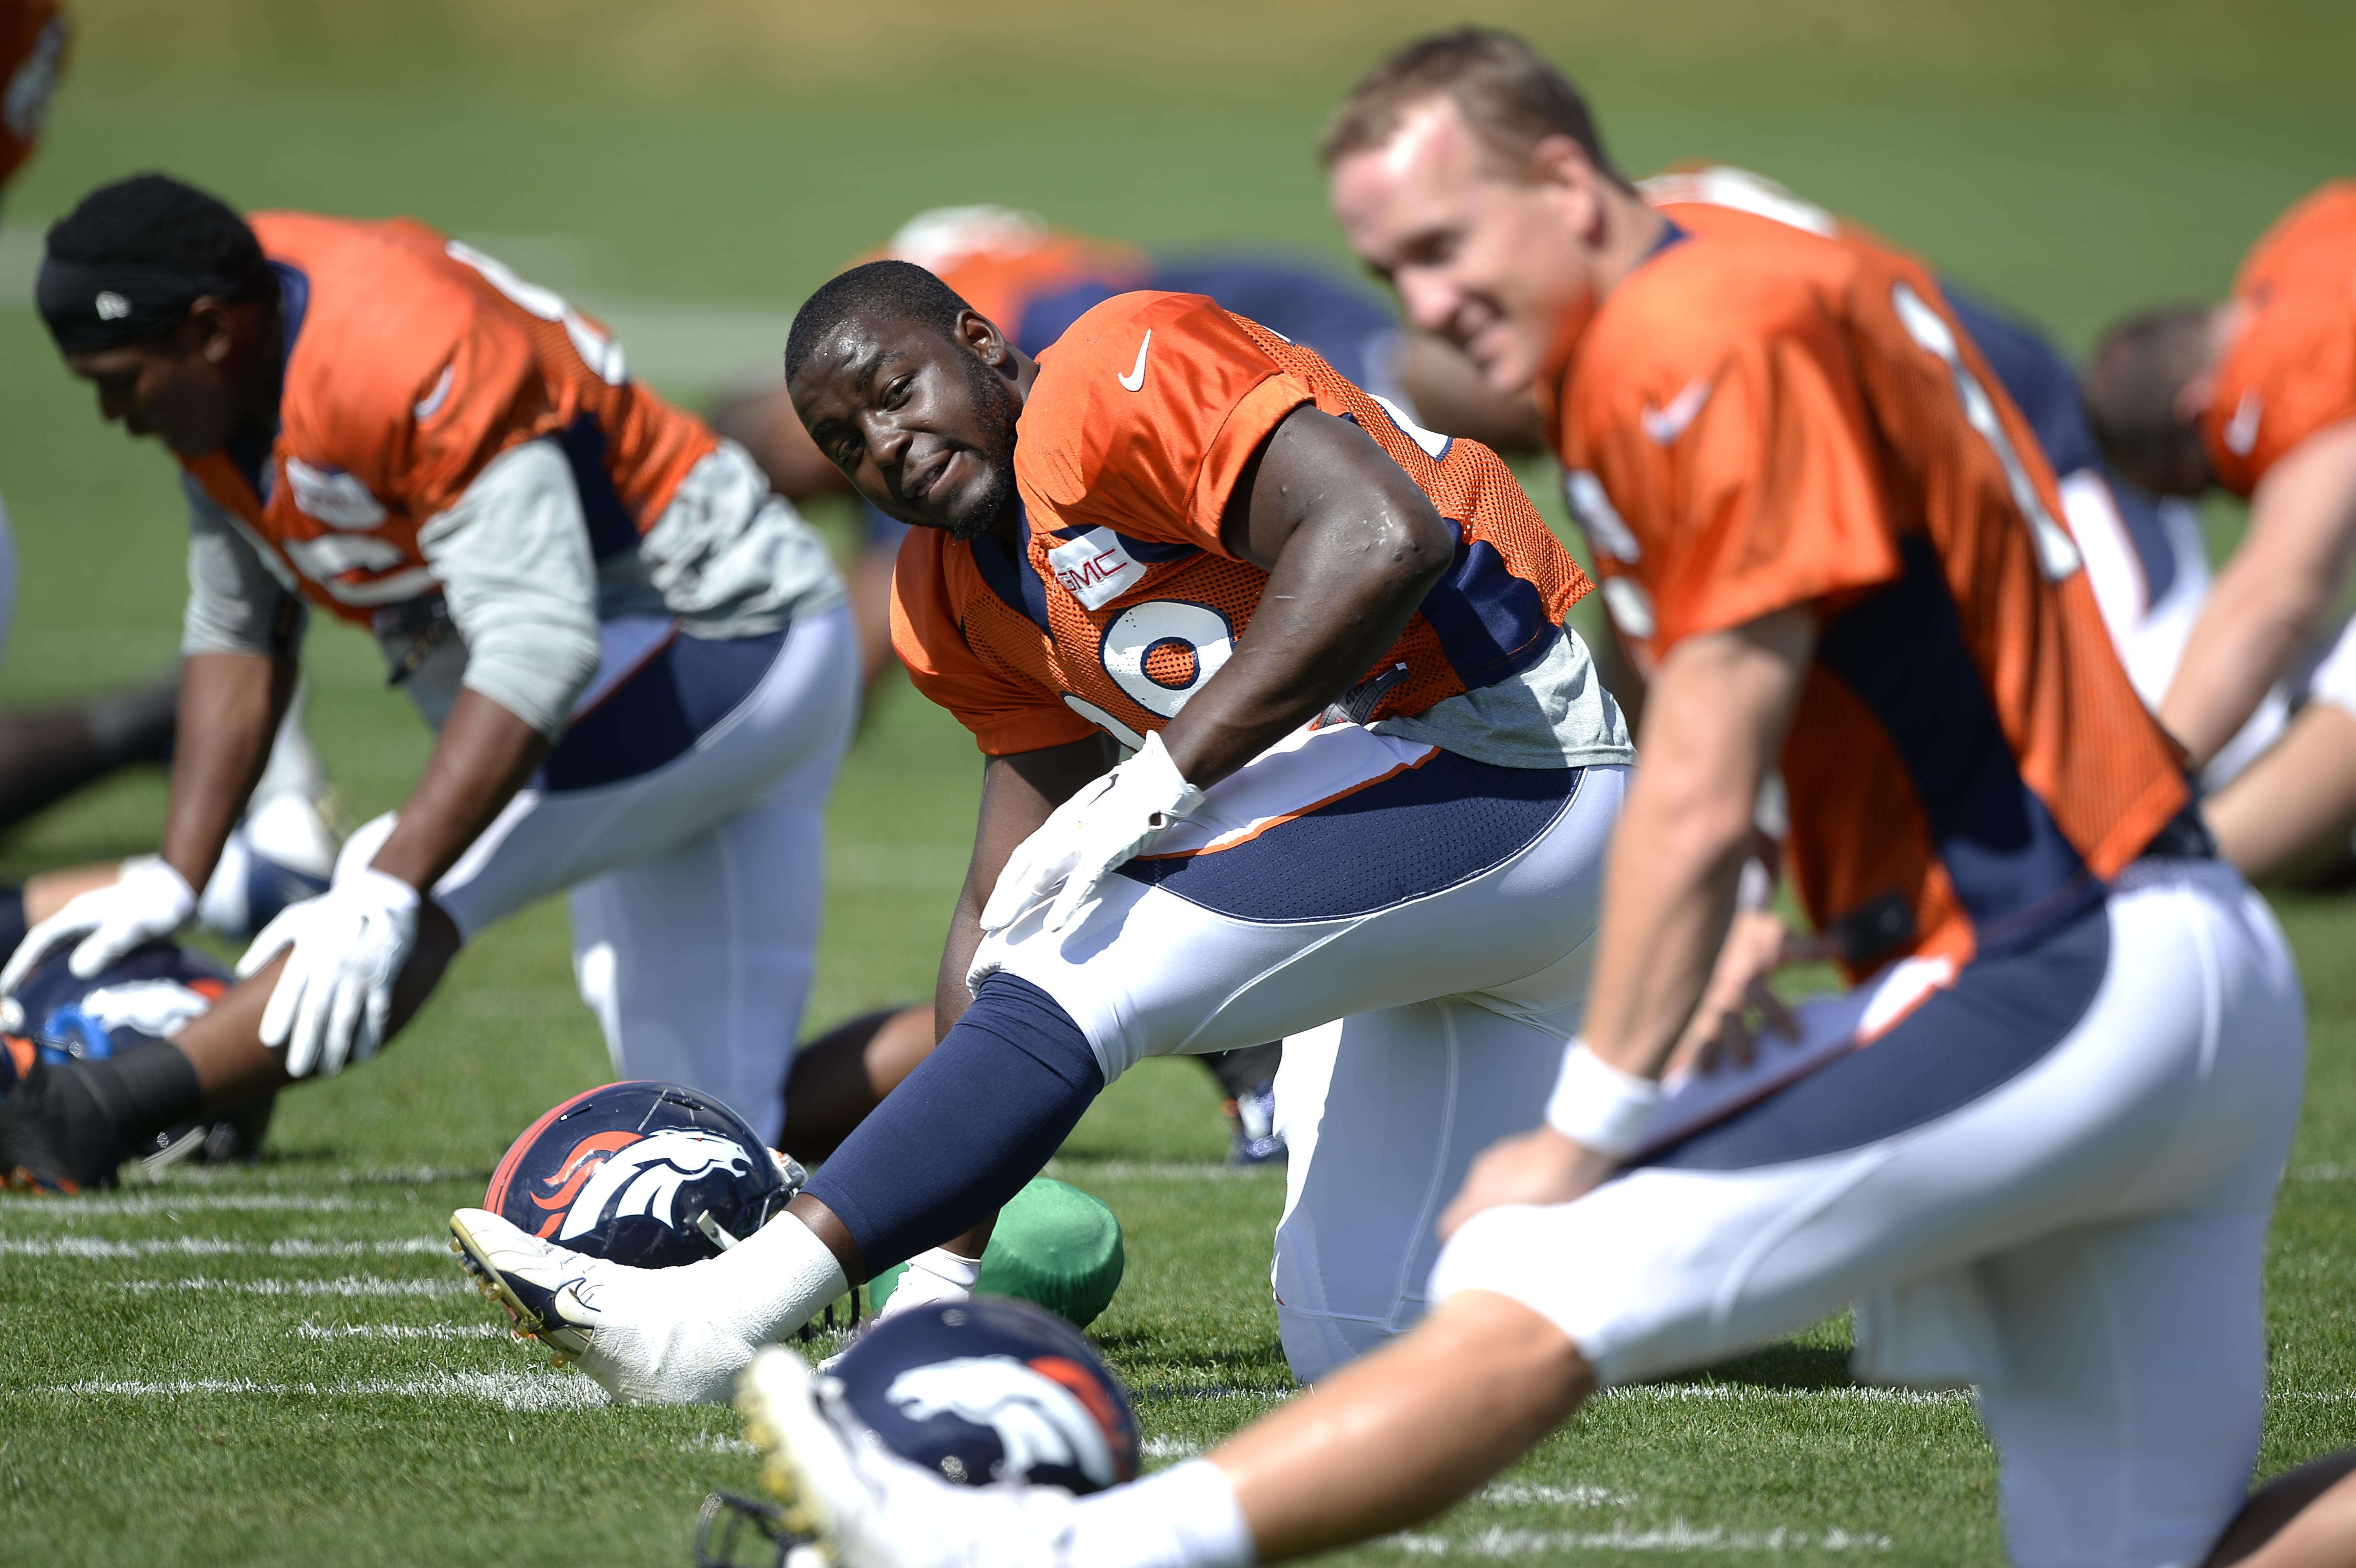 NFL Bust Montee Ball Says His Arrest ‘Pushed Me Over the Edge in a Good Way’